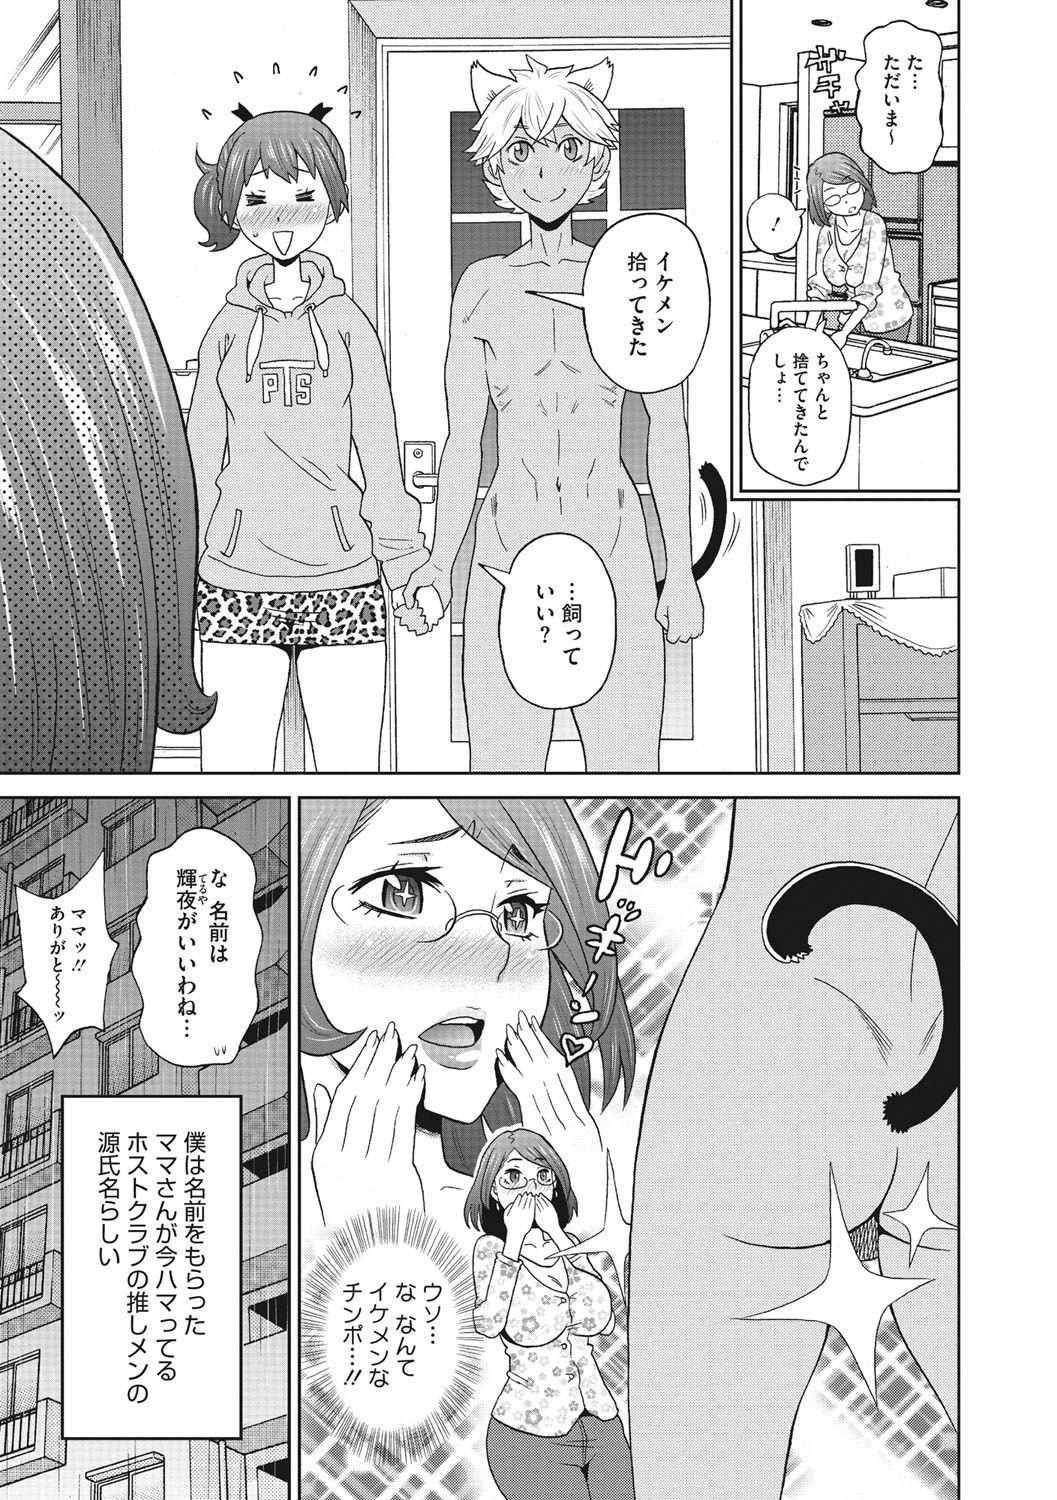 Sextoy Itoshiki Acmate - My Lovely Acmate Titten - Page 6